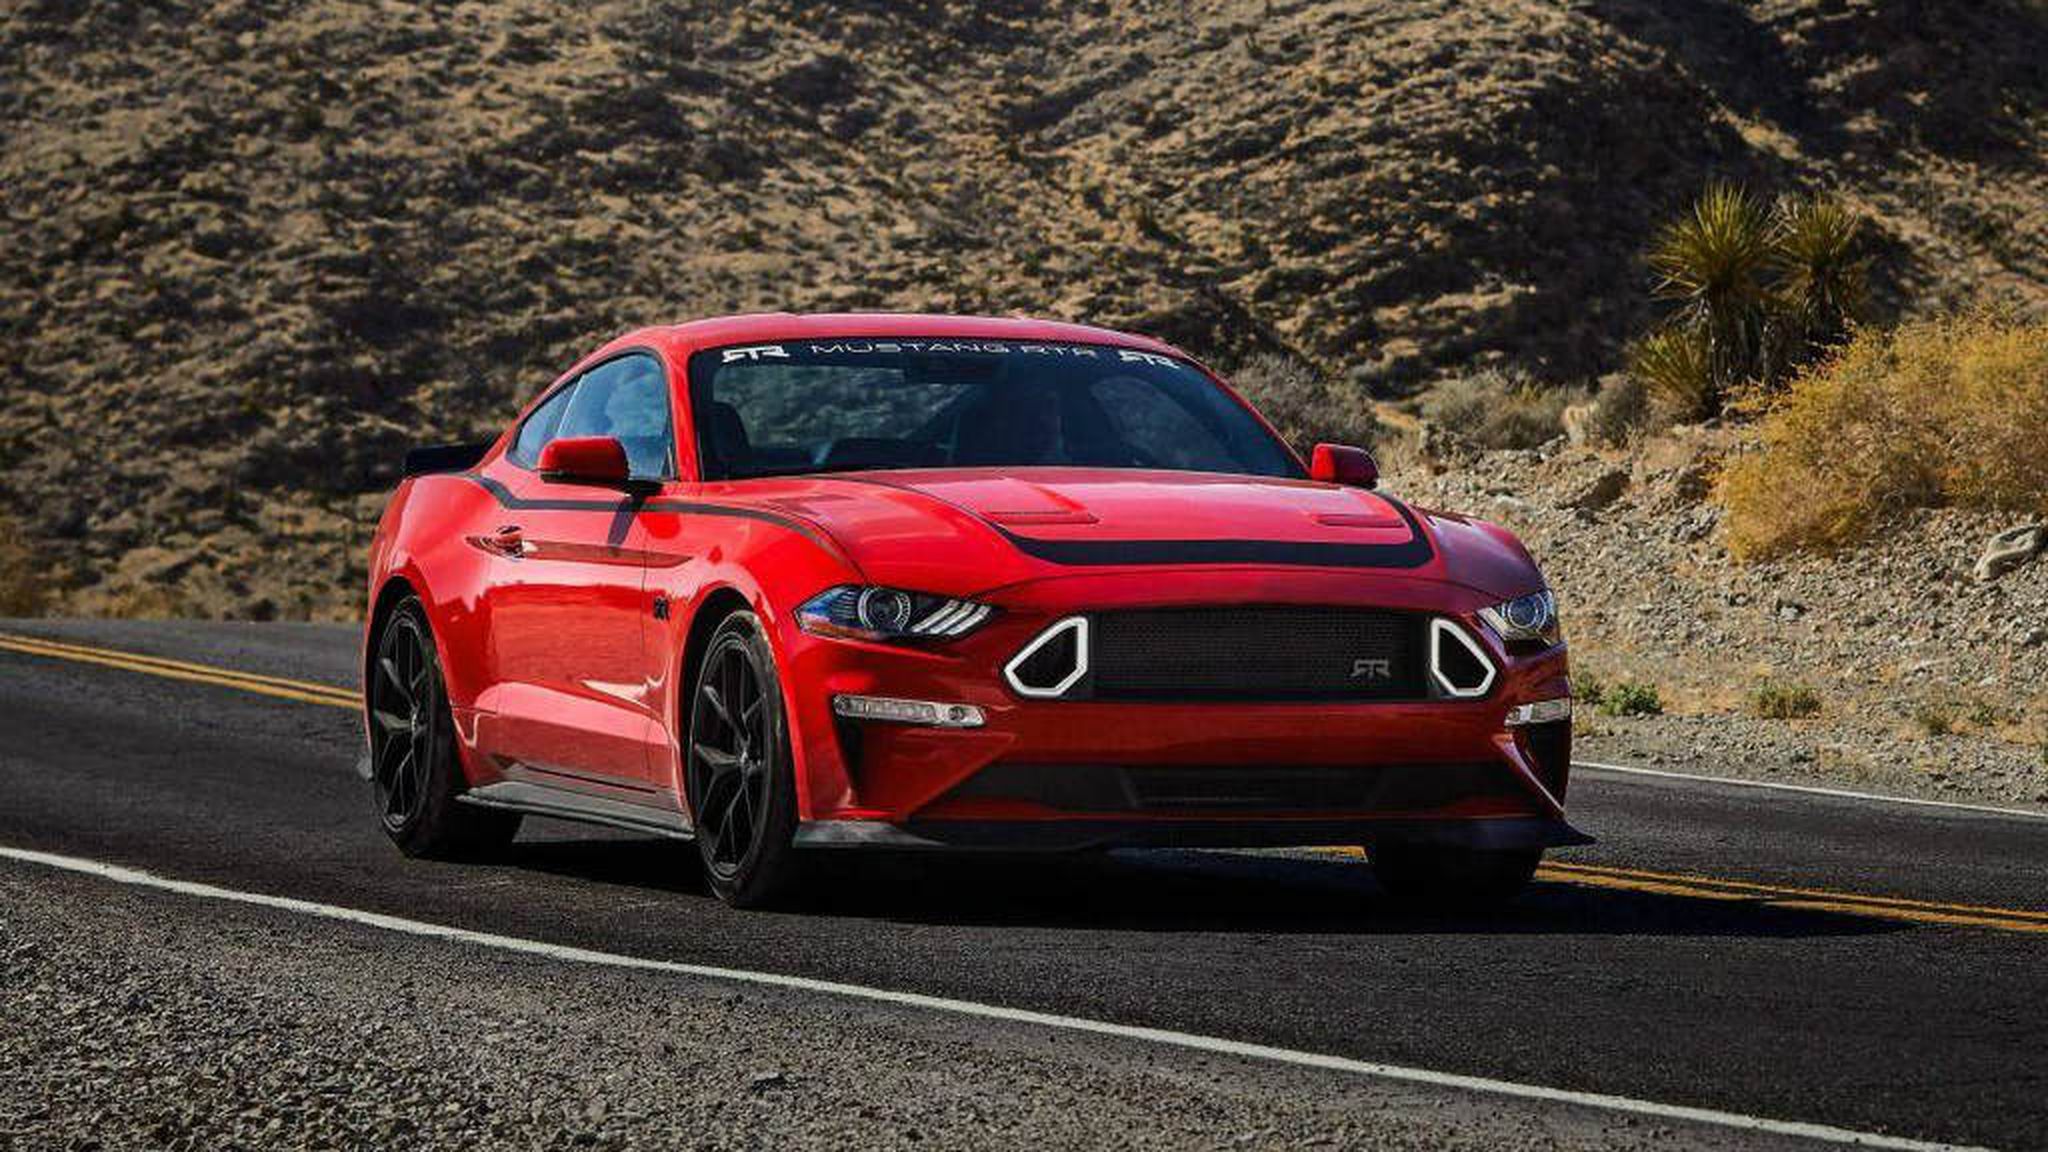 Ford Mustang Series 1 RTR